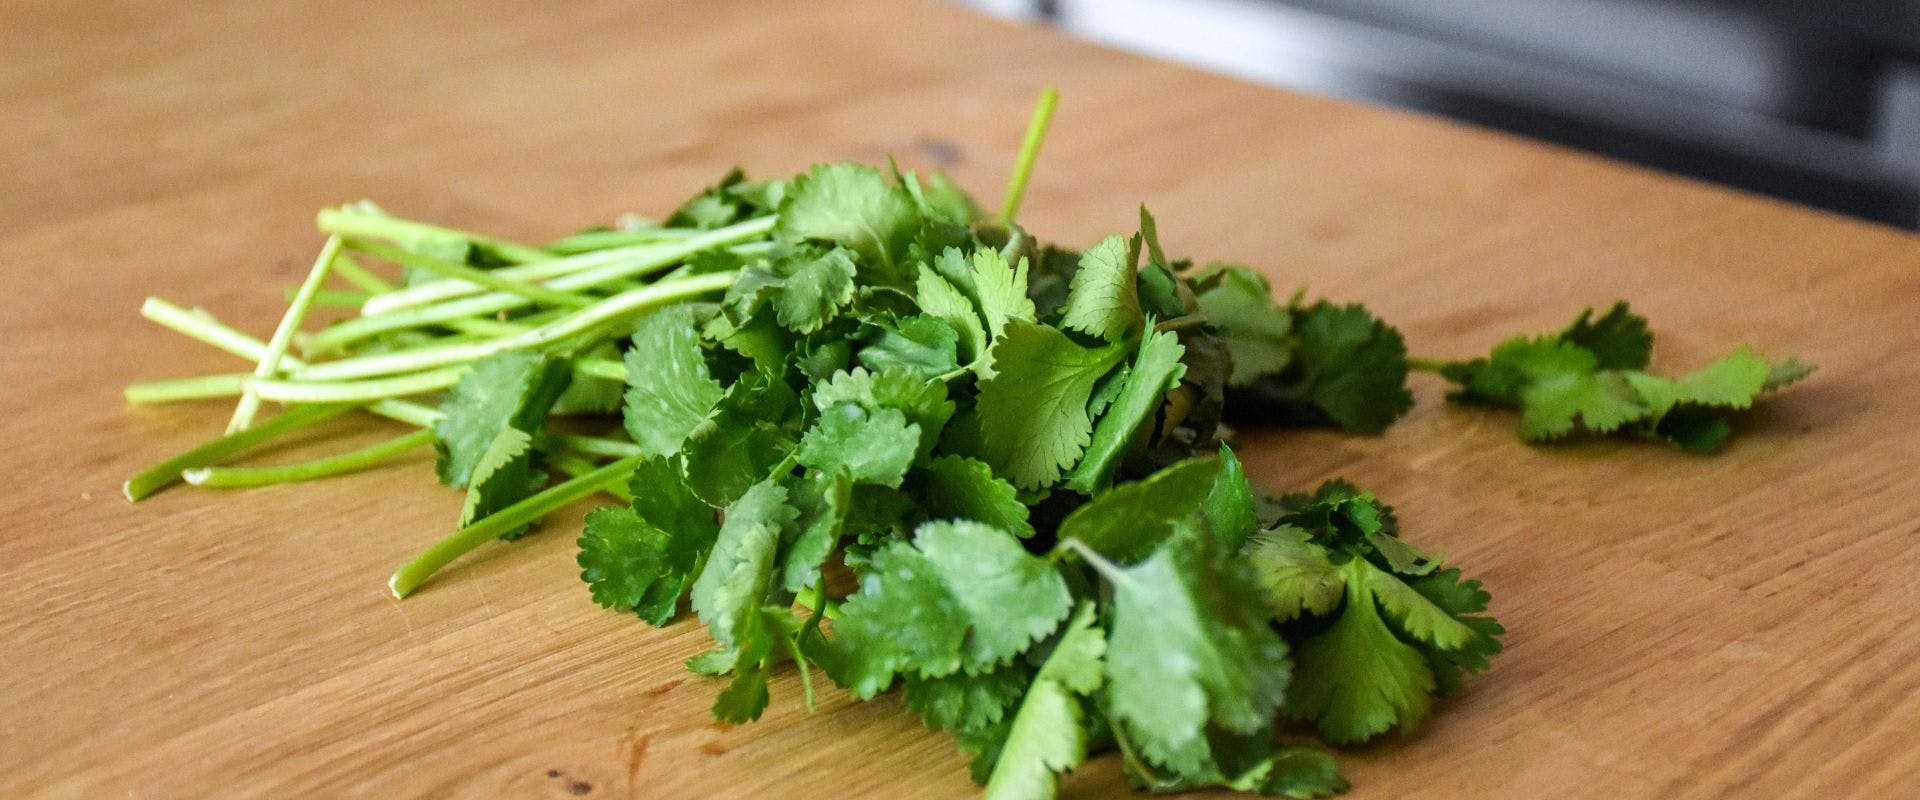 Cilantro on a wooden chopping board